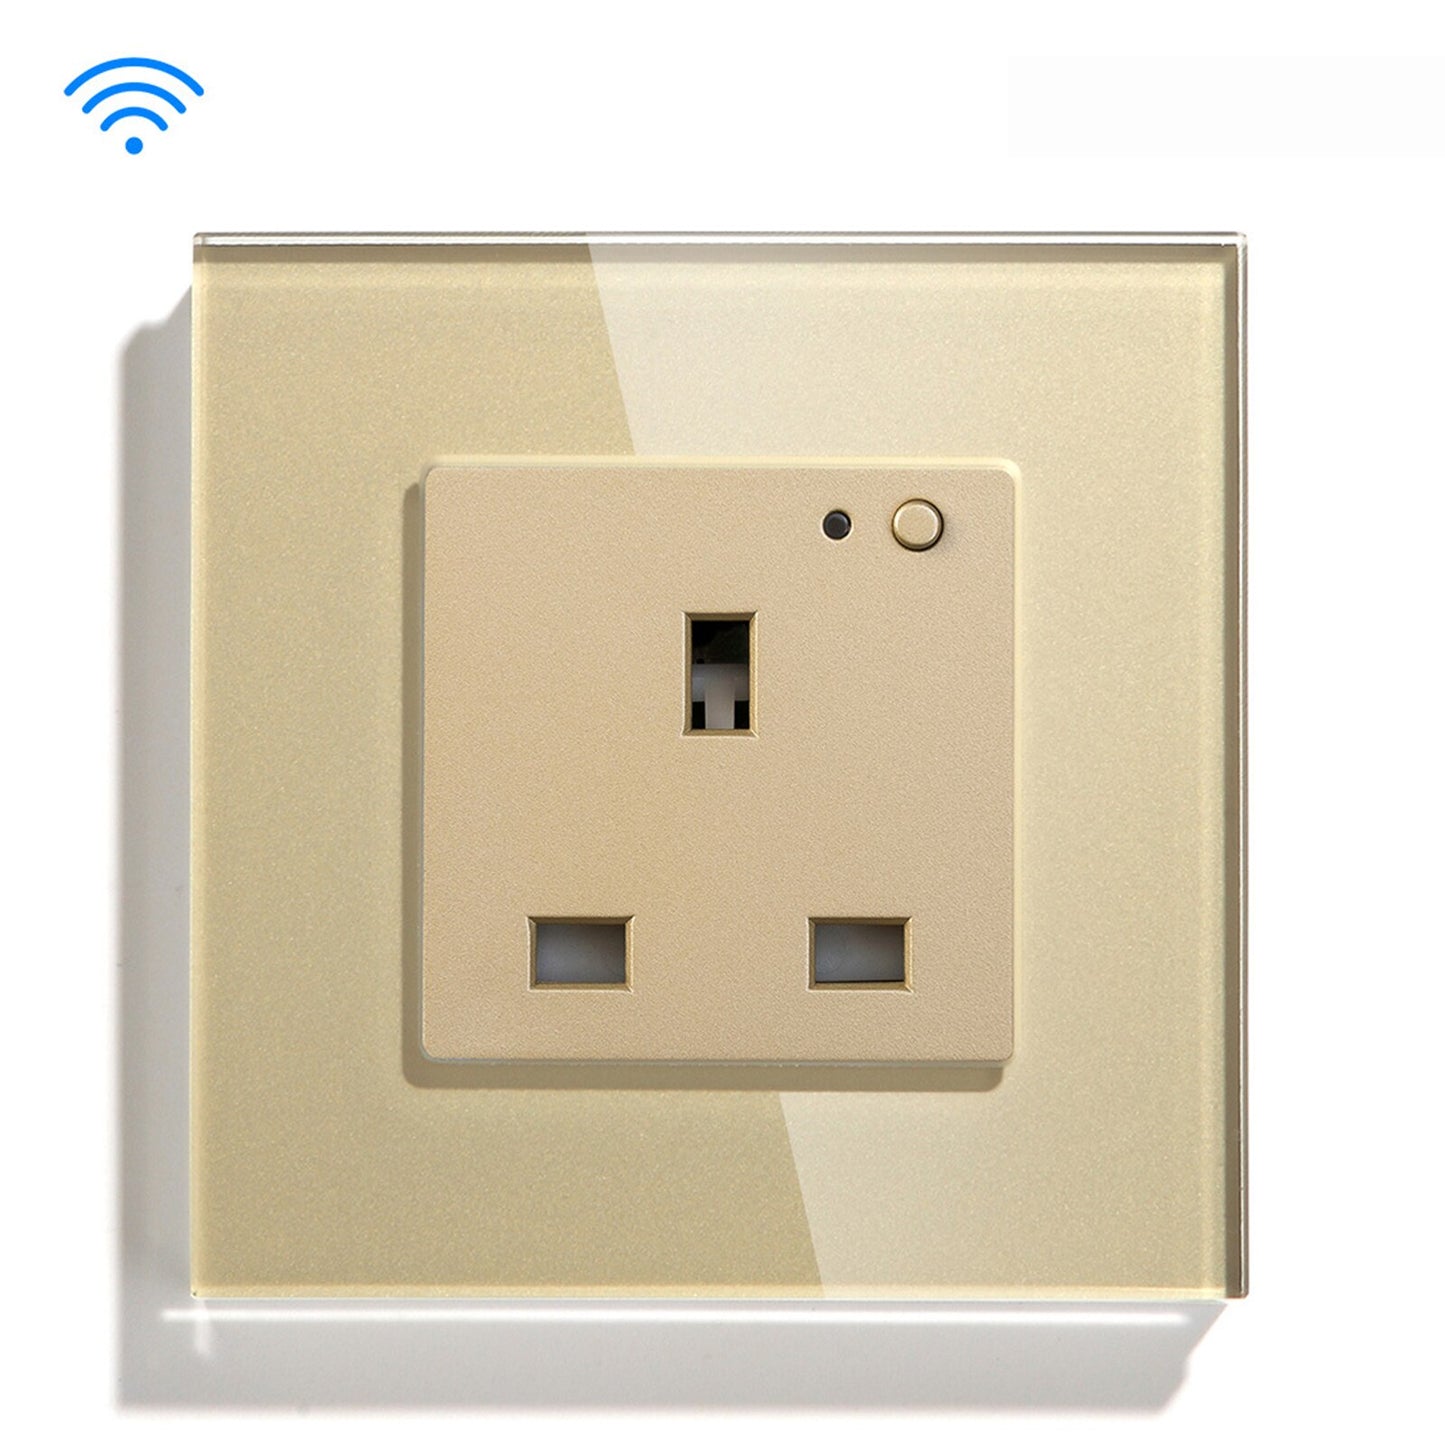 Anjielosmart Tuya WIFI in-Wall Outlets, No Hub Required – Smart Socket Works with Alexa and Google Home, Only 2.4 GHz